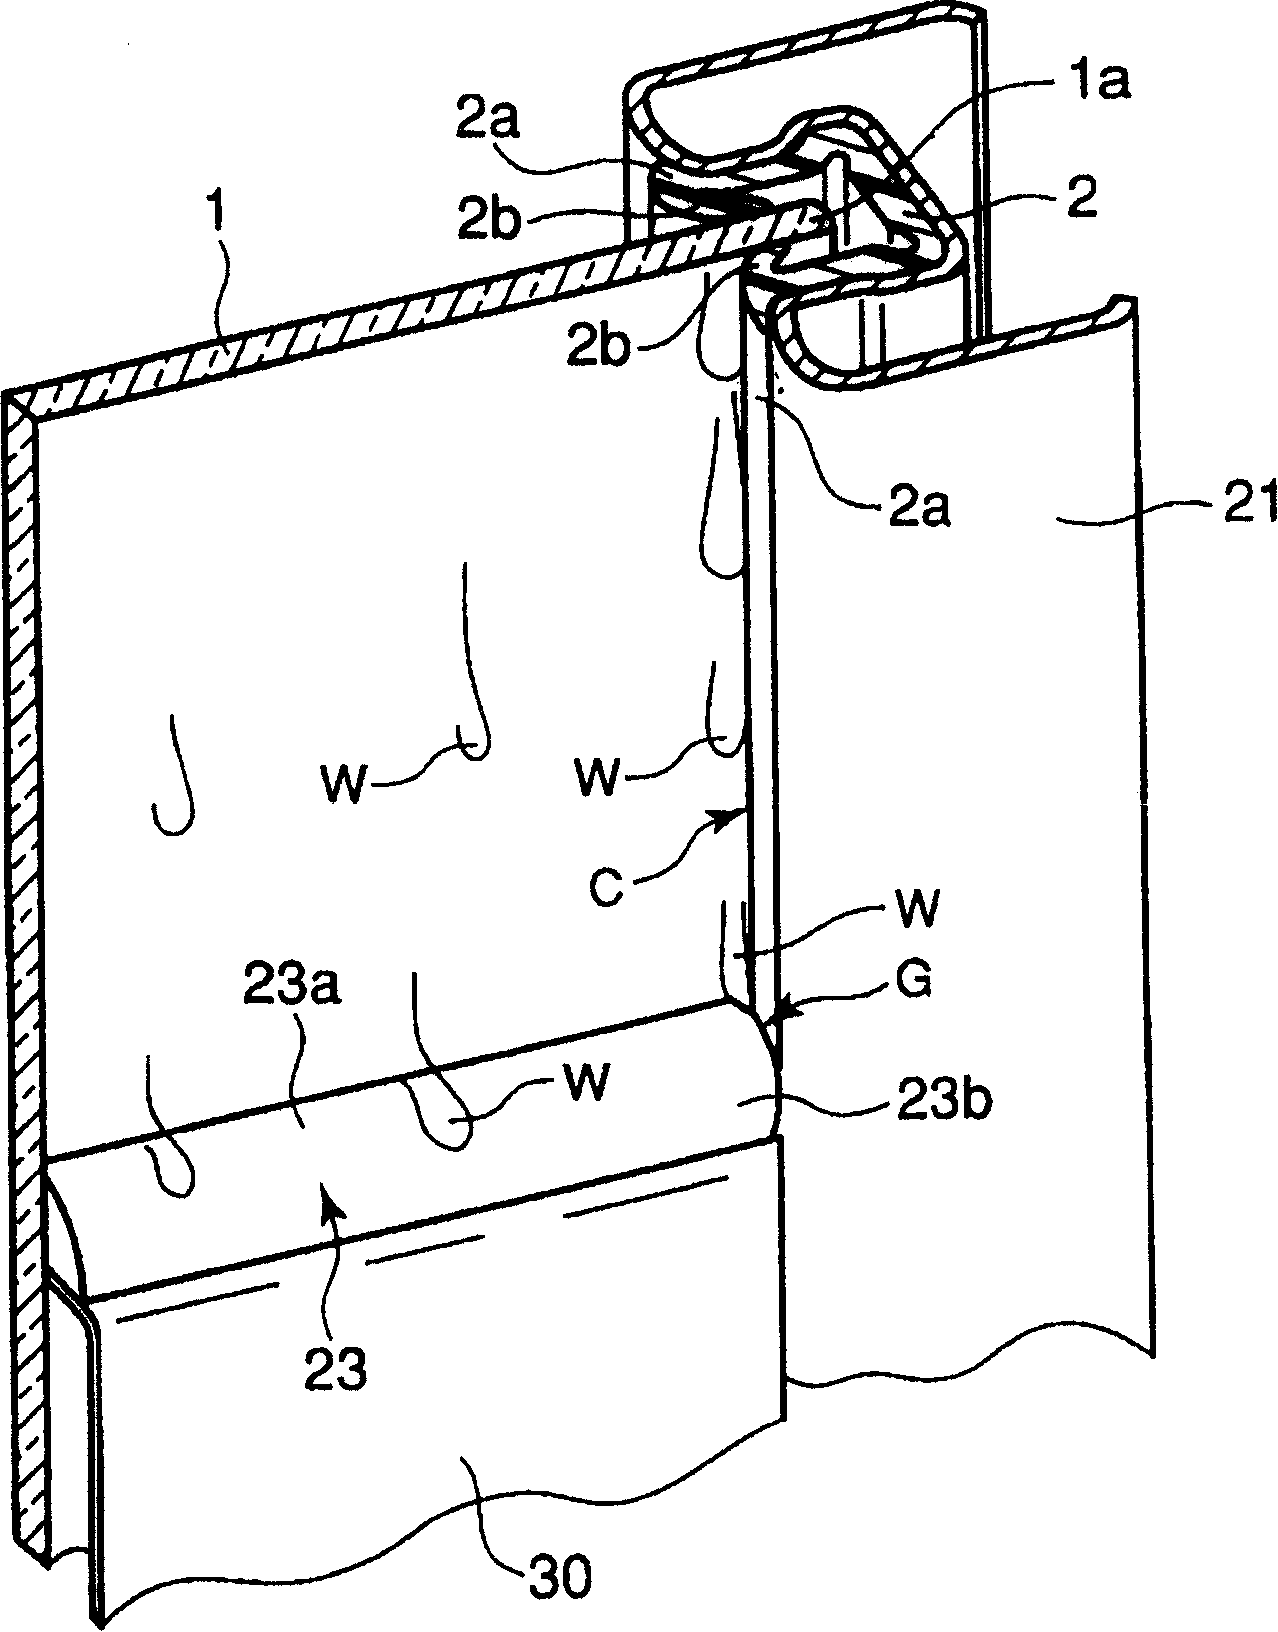 Water drop induction structure of elevating glass